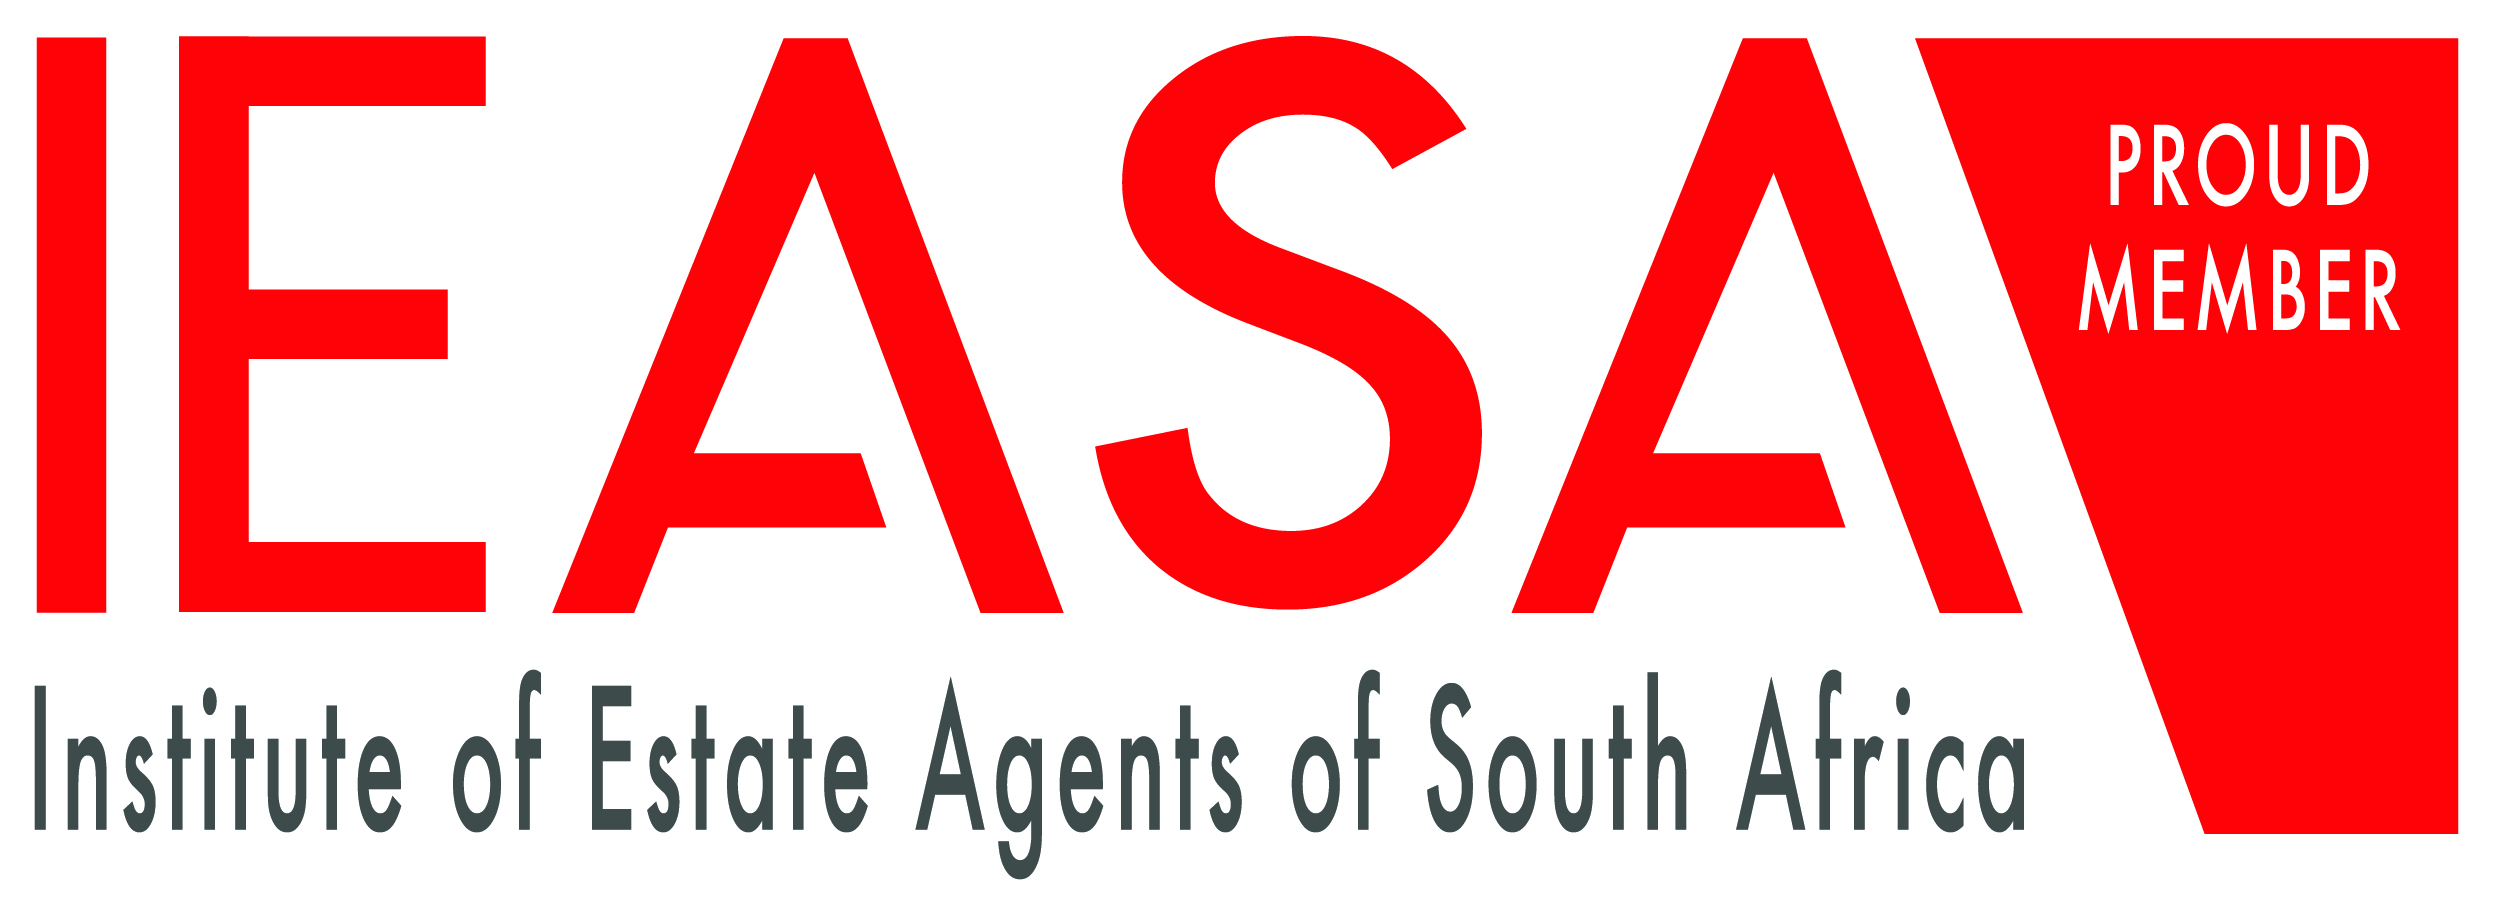 Institute of Estate Agents of South Africa